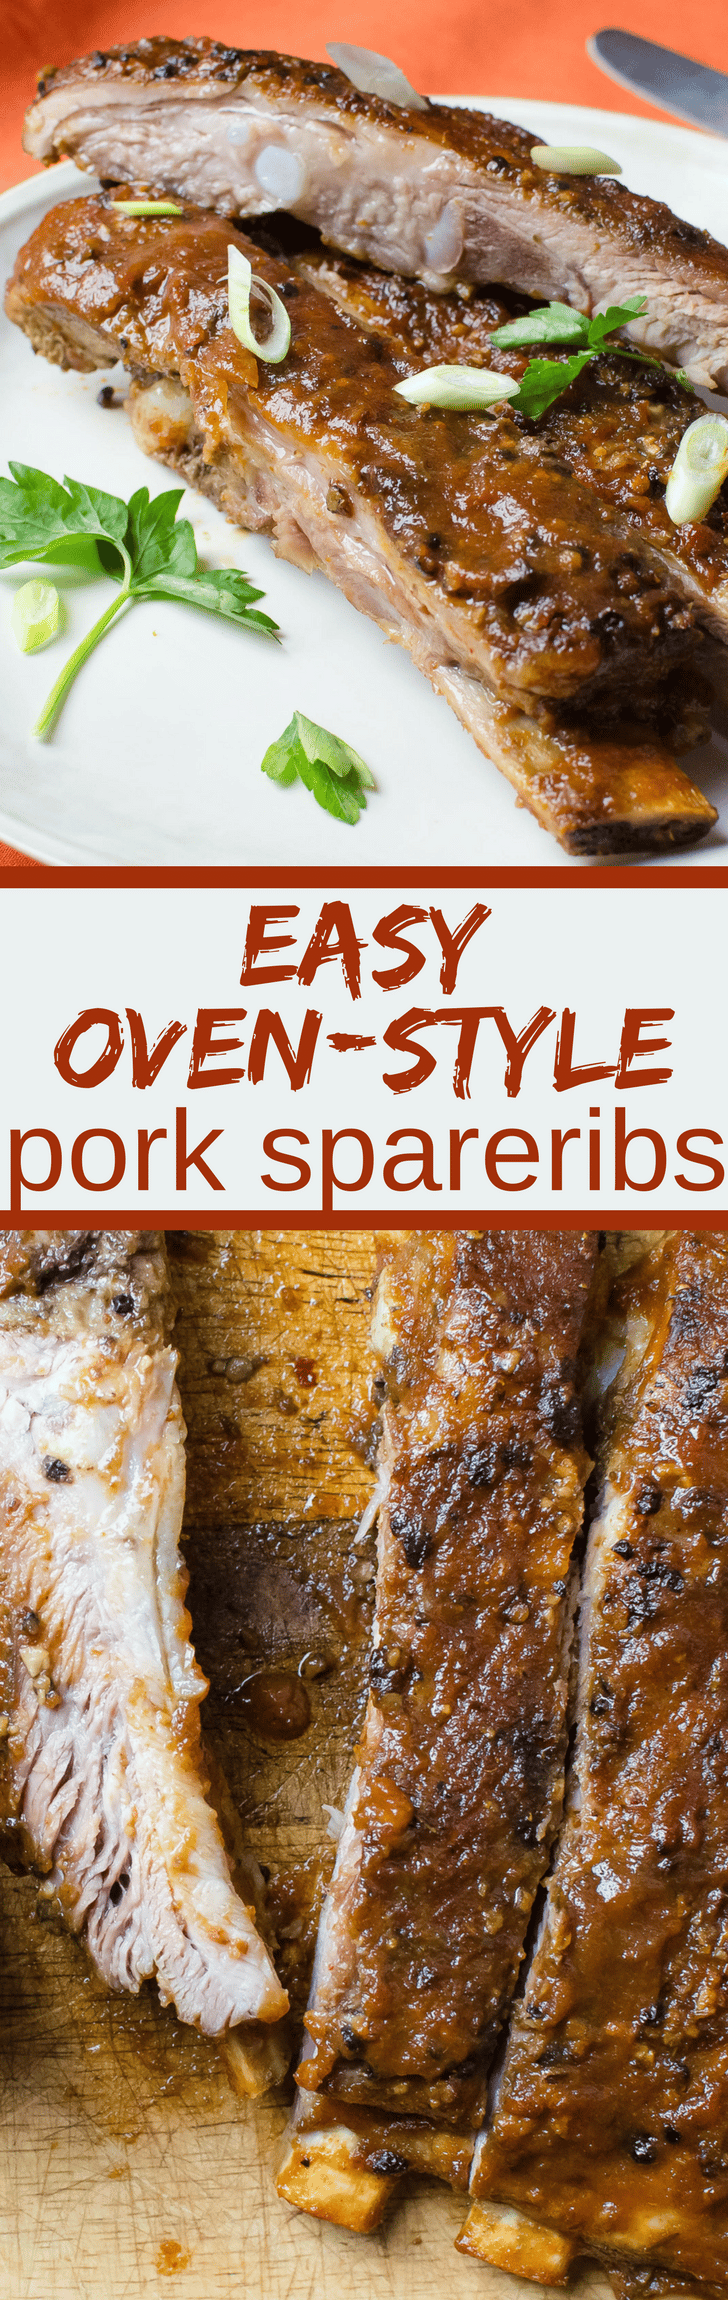 Want a foolproof recipe for perfectly tender ribs? With a few pantry staples you can make Easy Oven-Style Pork Spareribs. No grill required. #ribs #spareribs #barbecuedribs #barbecue #BBQ